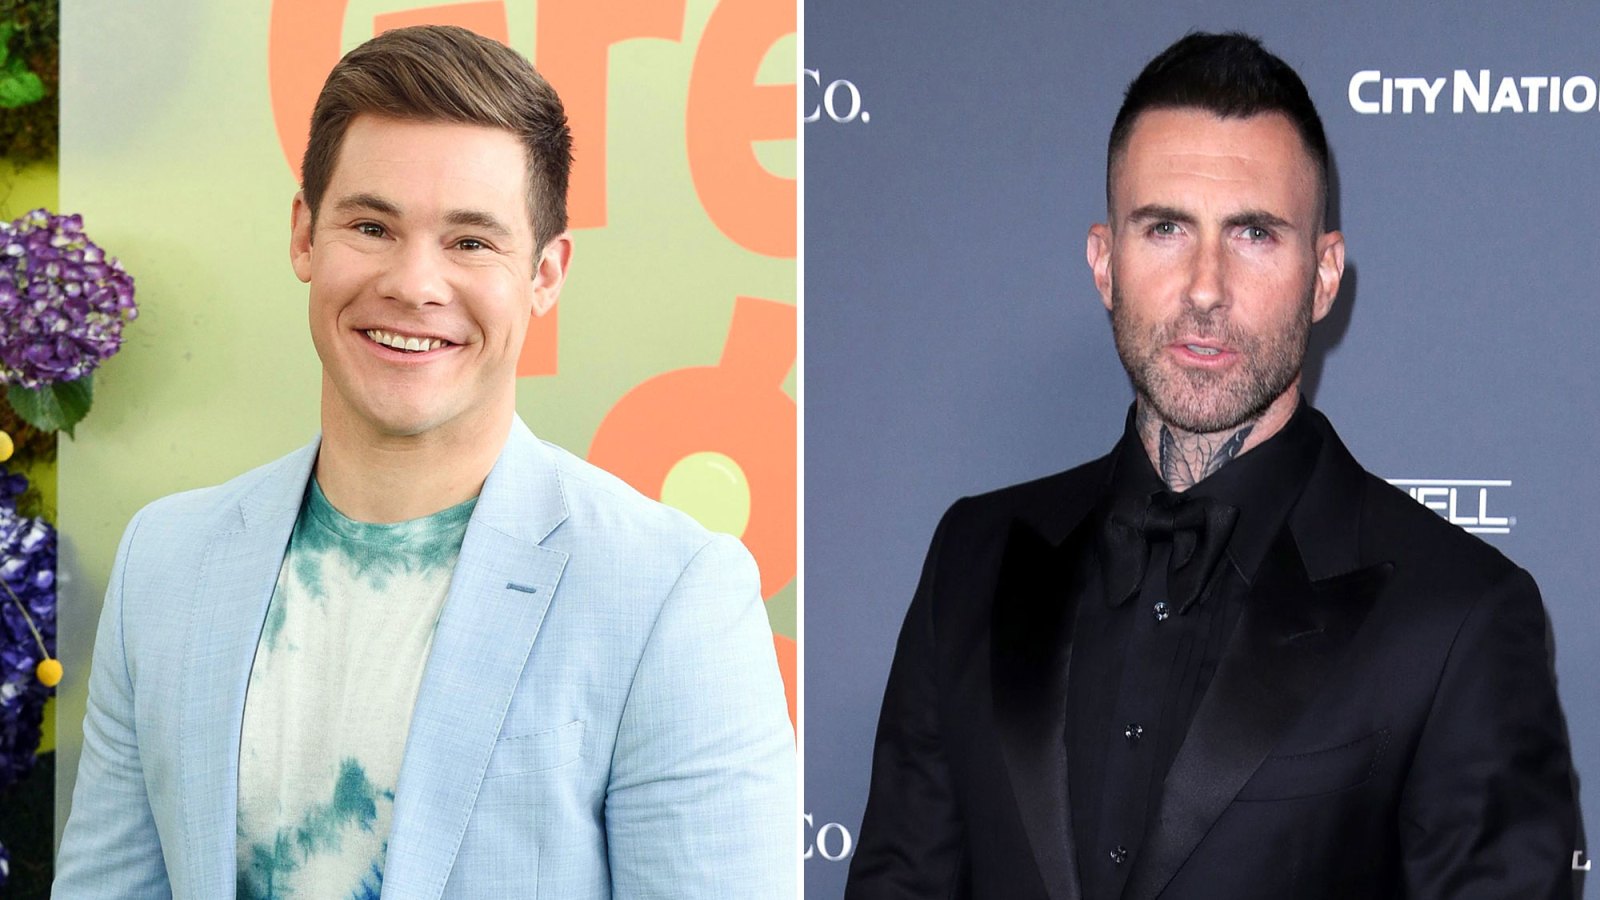 Pitch Perfect Star Adam Devine Jokes That He’s ‘Not Adam Levine’ Amid Singer’s Cheating Scandal